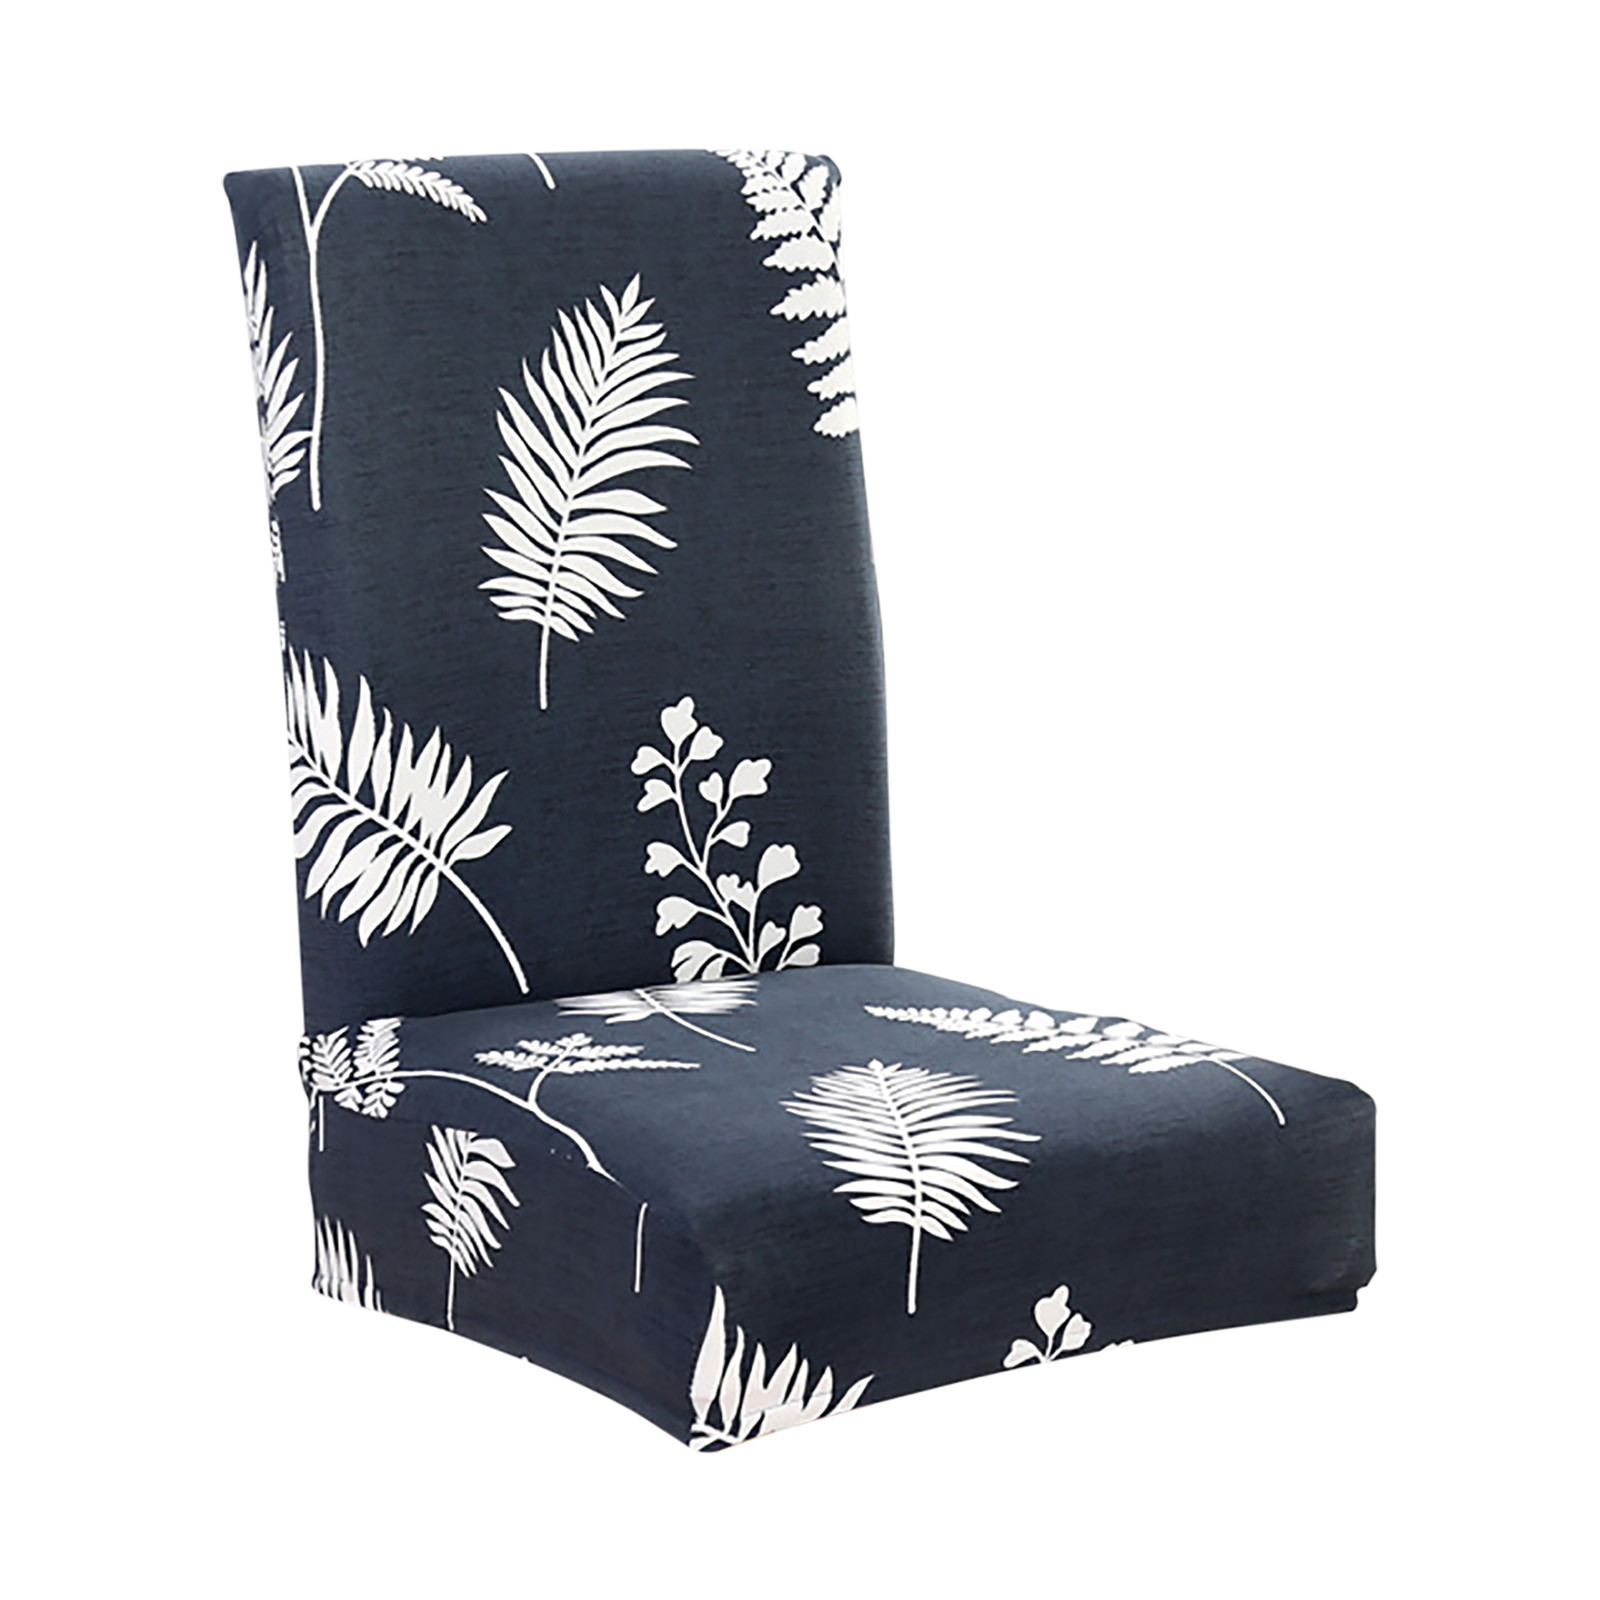 wendunide home textiles Chair Cover Stretch Chair Package Chair Cover One-piece Stretch Chair Cover E - image 1 of 2